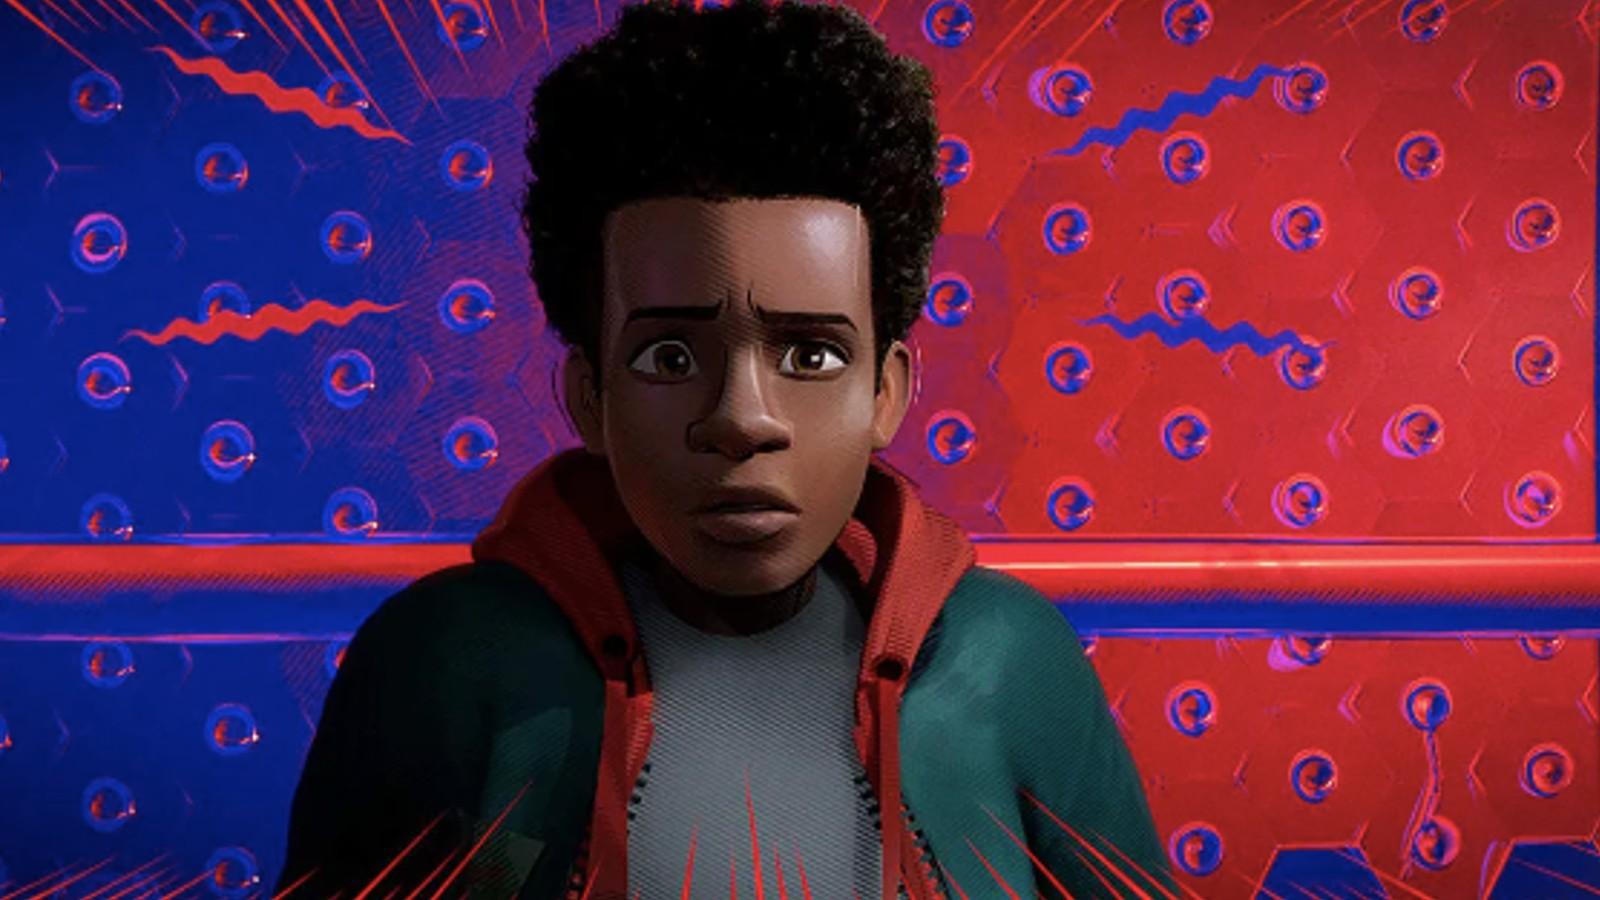 Miles Morales gets his Spider sense in Spider-Man: Into the Spider-Verse